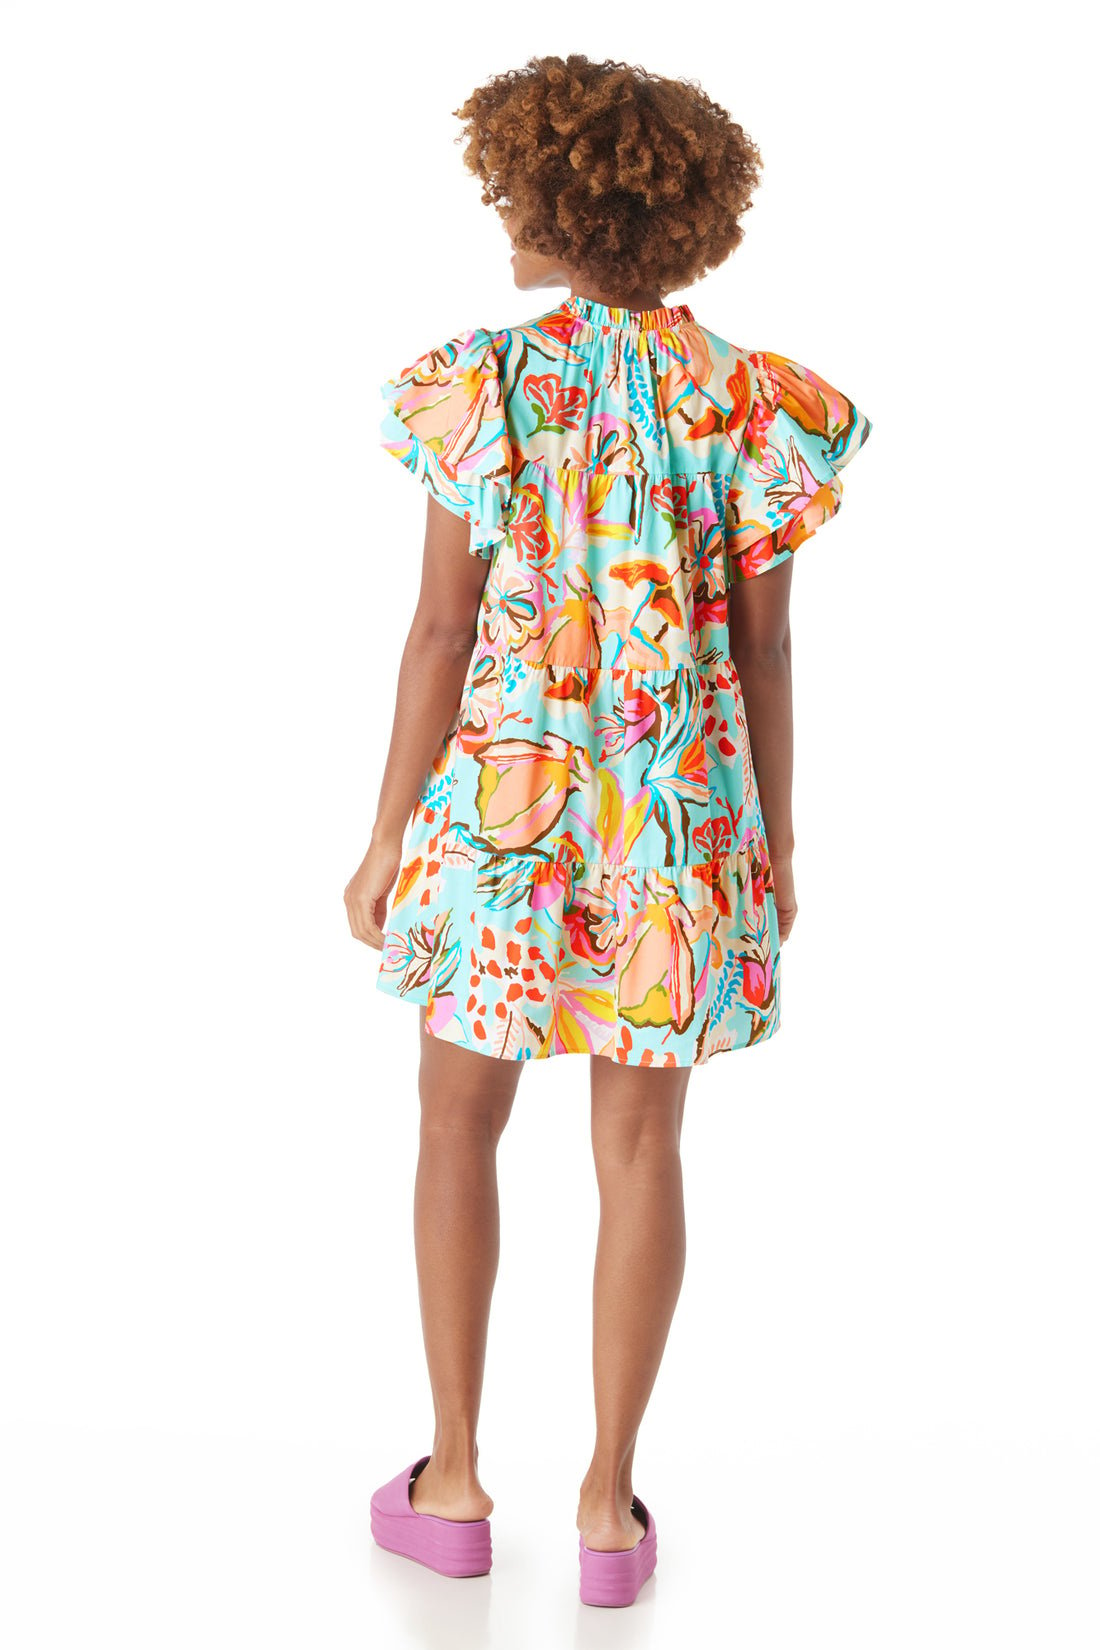 Crosby By Mollie Burch Mila Dress Canyon Floral